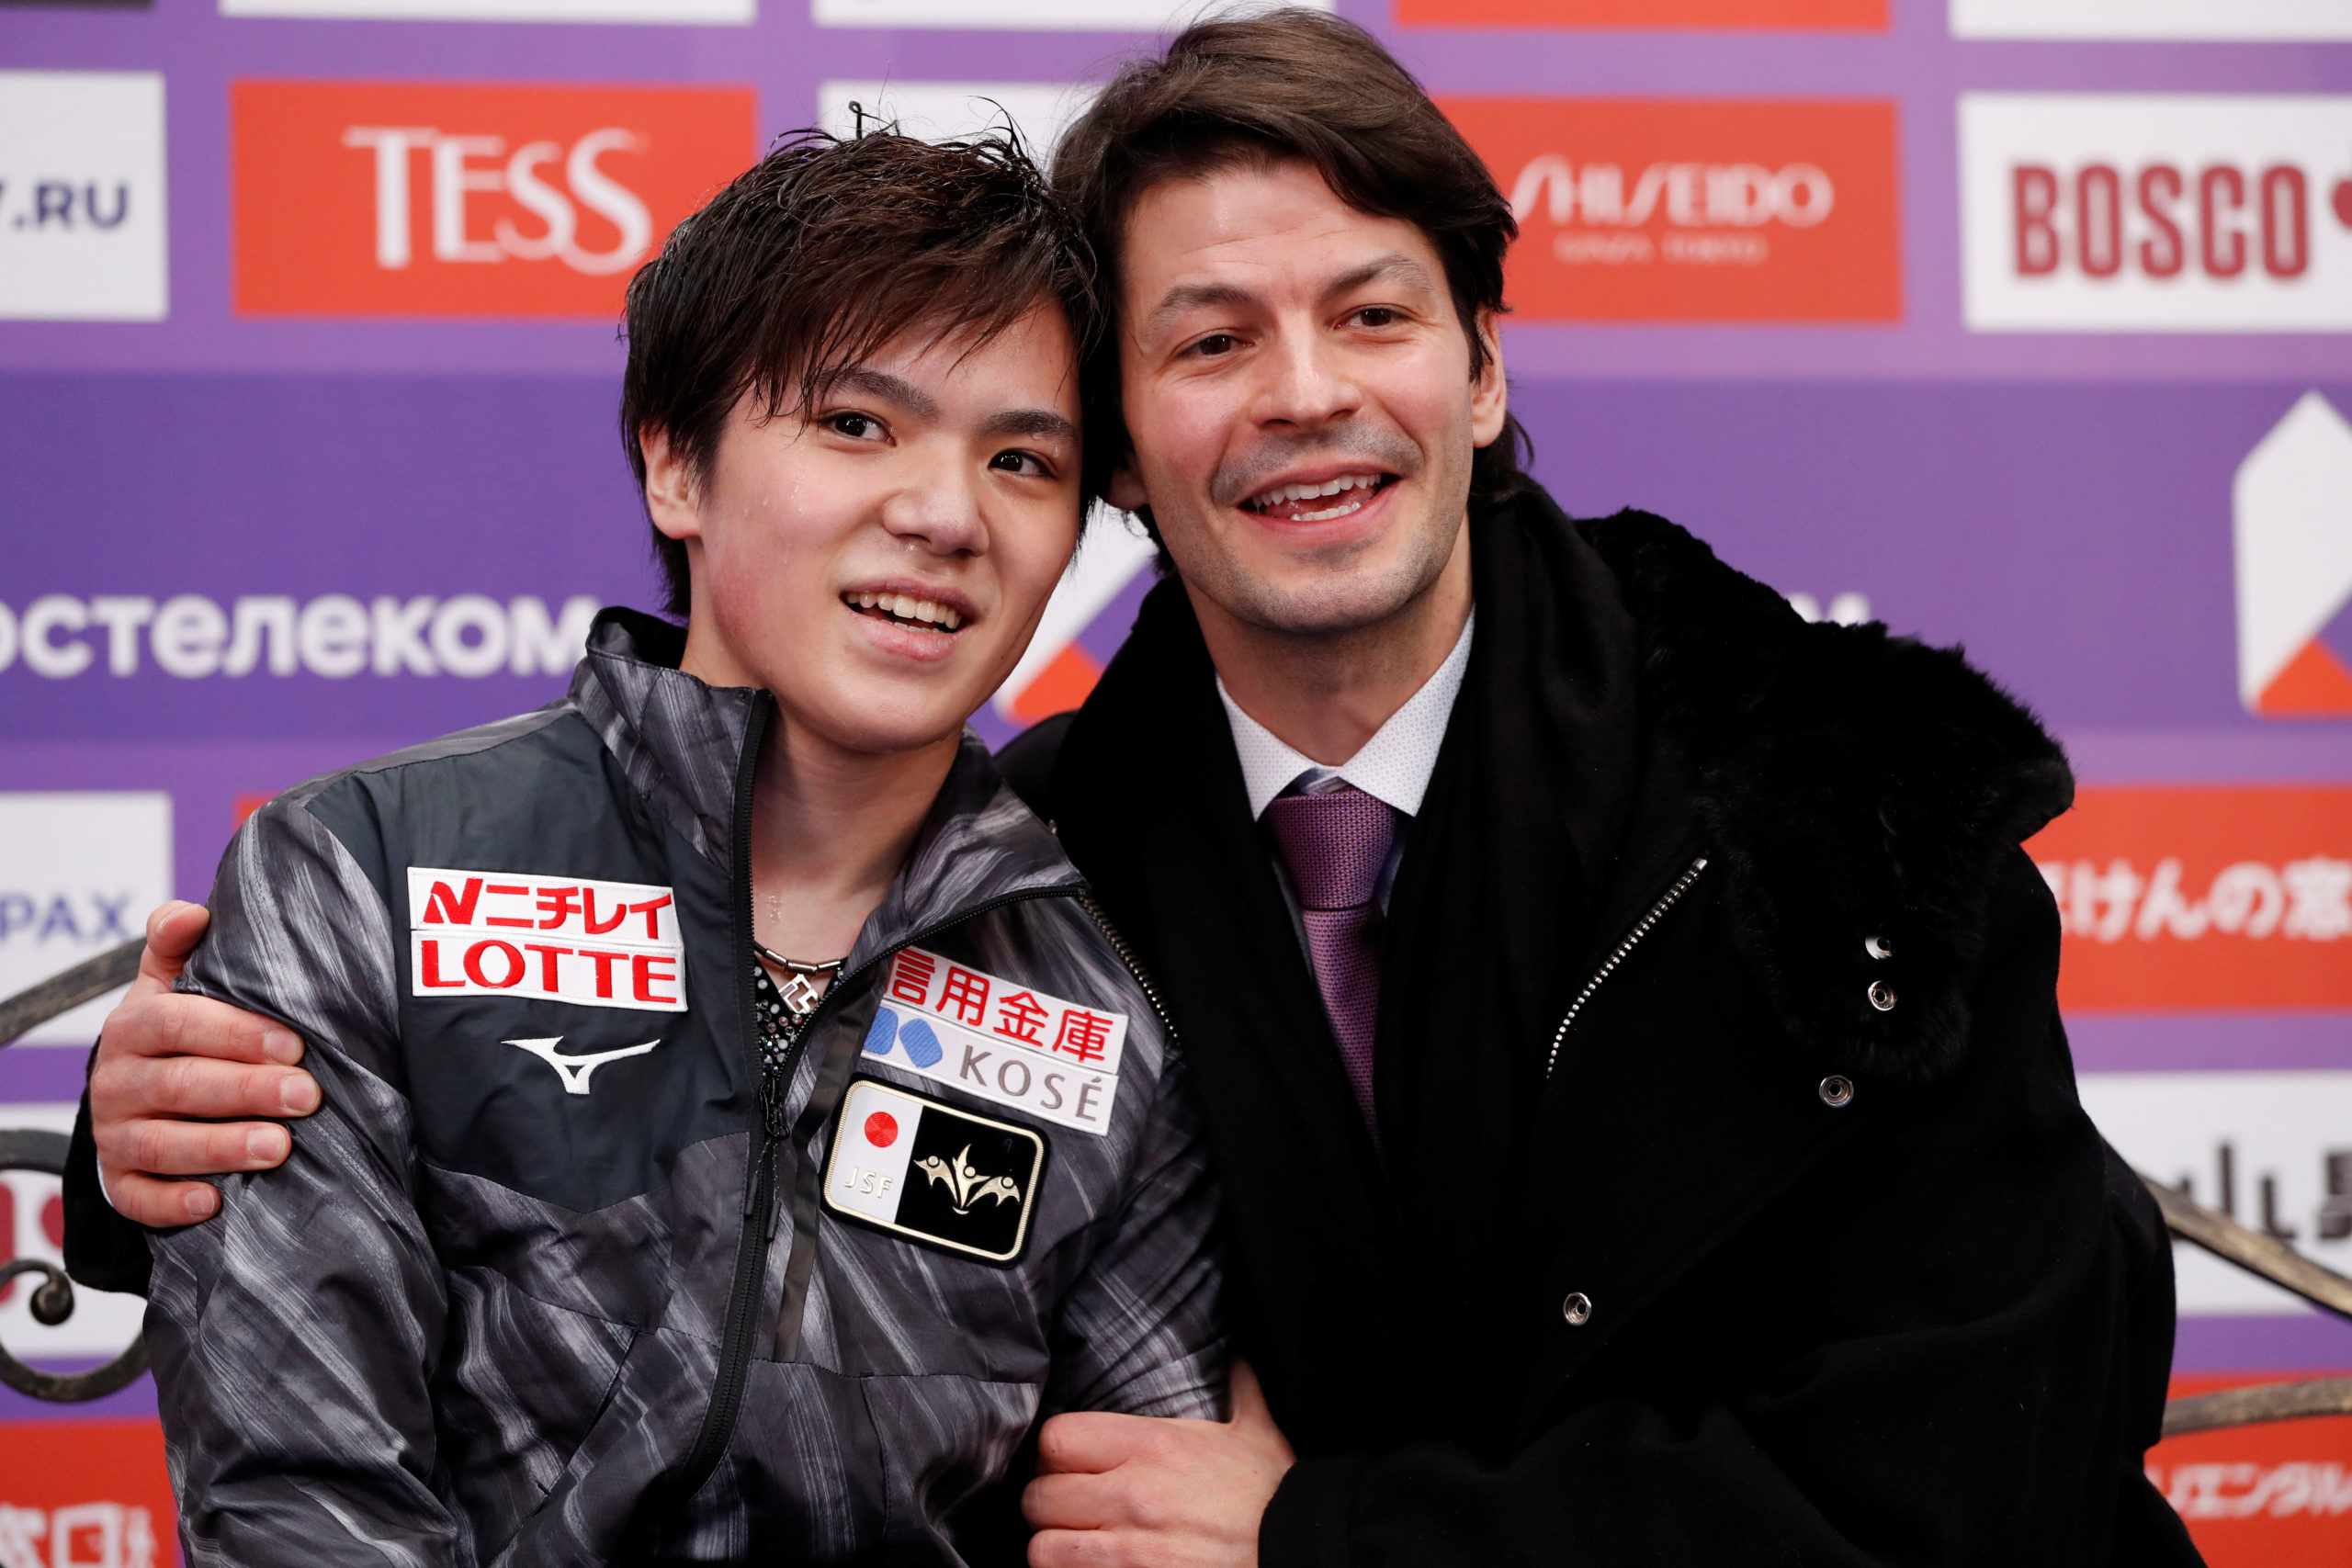 ISU Grand Prix of Figure Skating - 2019 Rostelecom Cup - Men's Free Skating - Megasport Sport Palace, Moscow, Russia - November 16, 2019   Japan's Shoma Uno with coach Stephane Lambiel after performing   